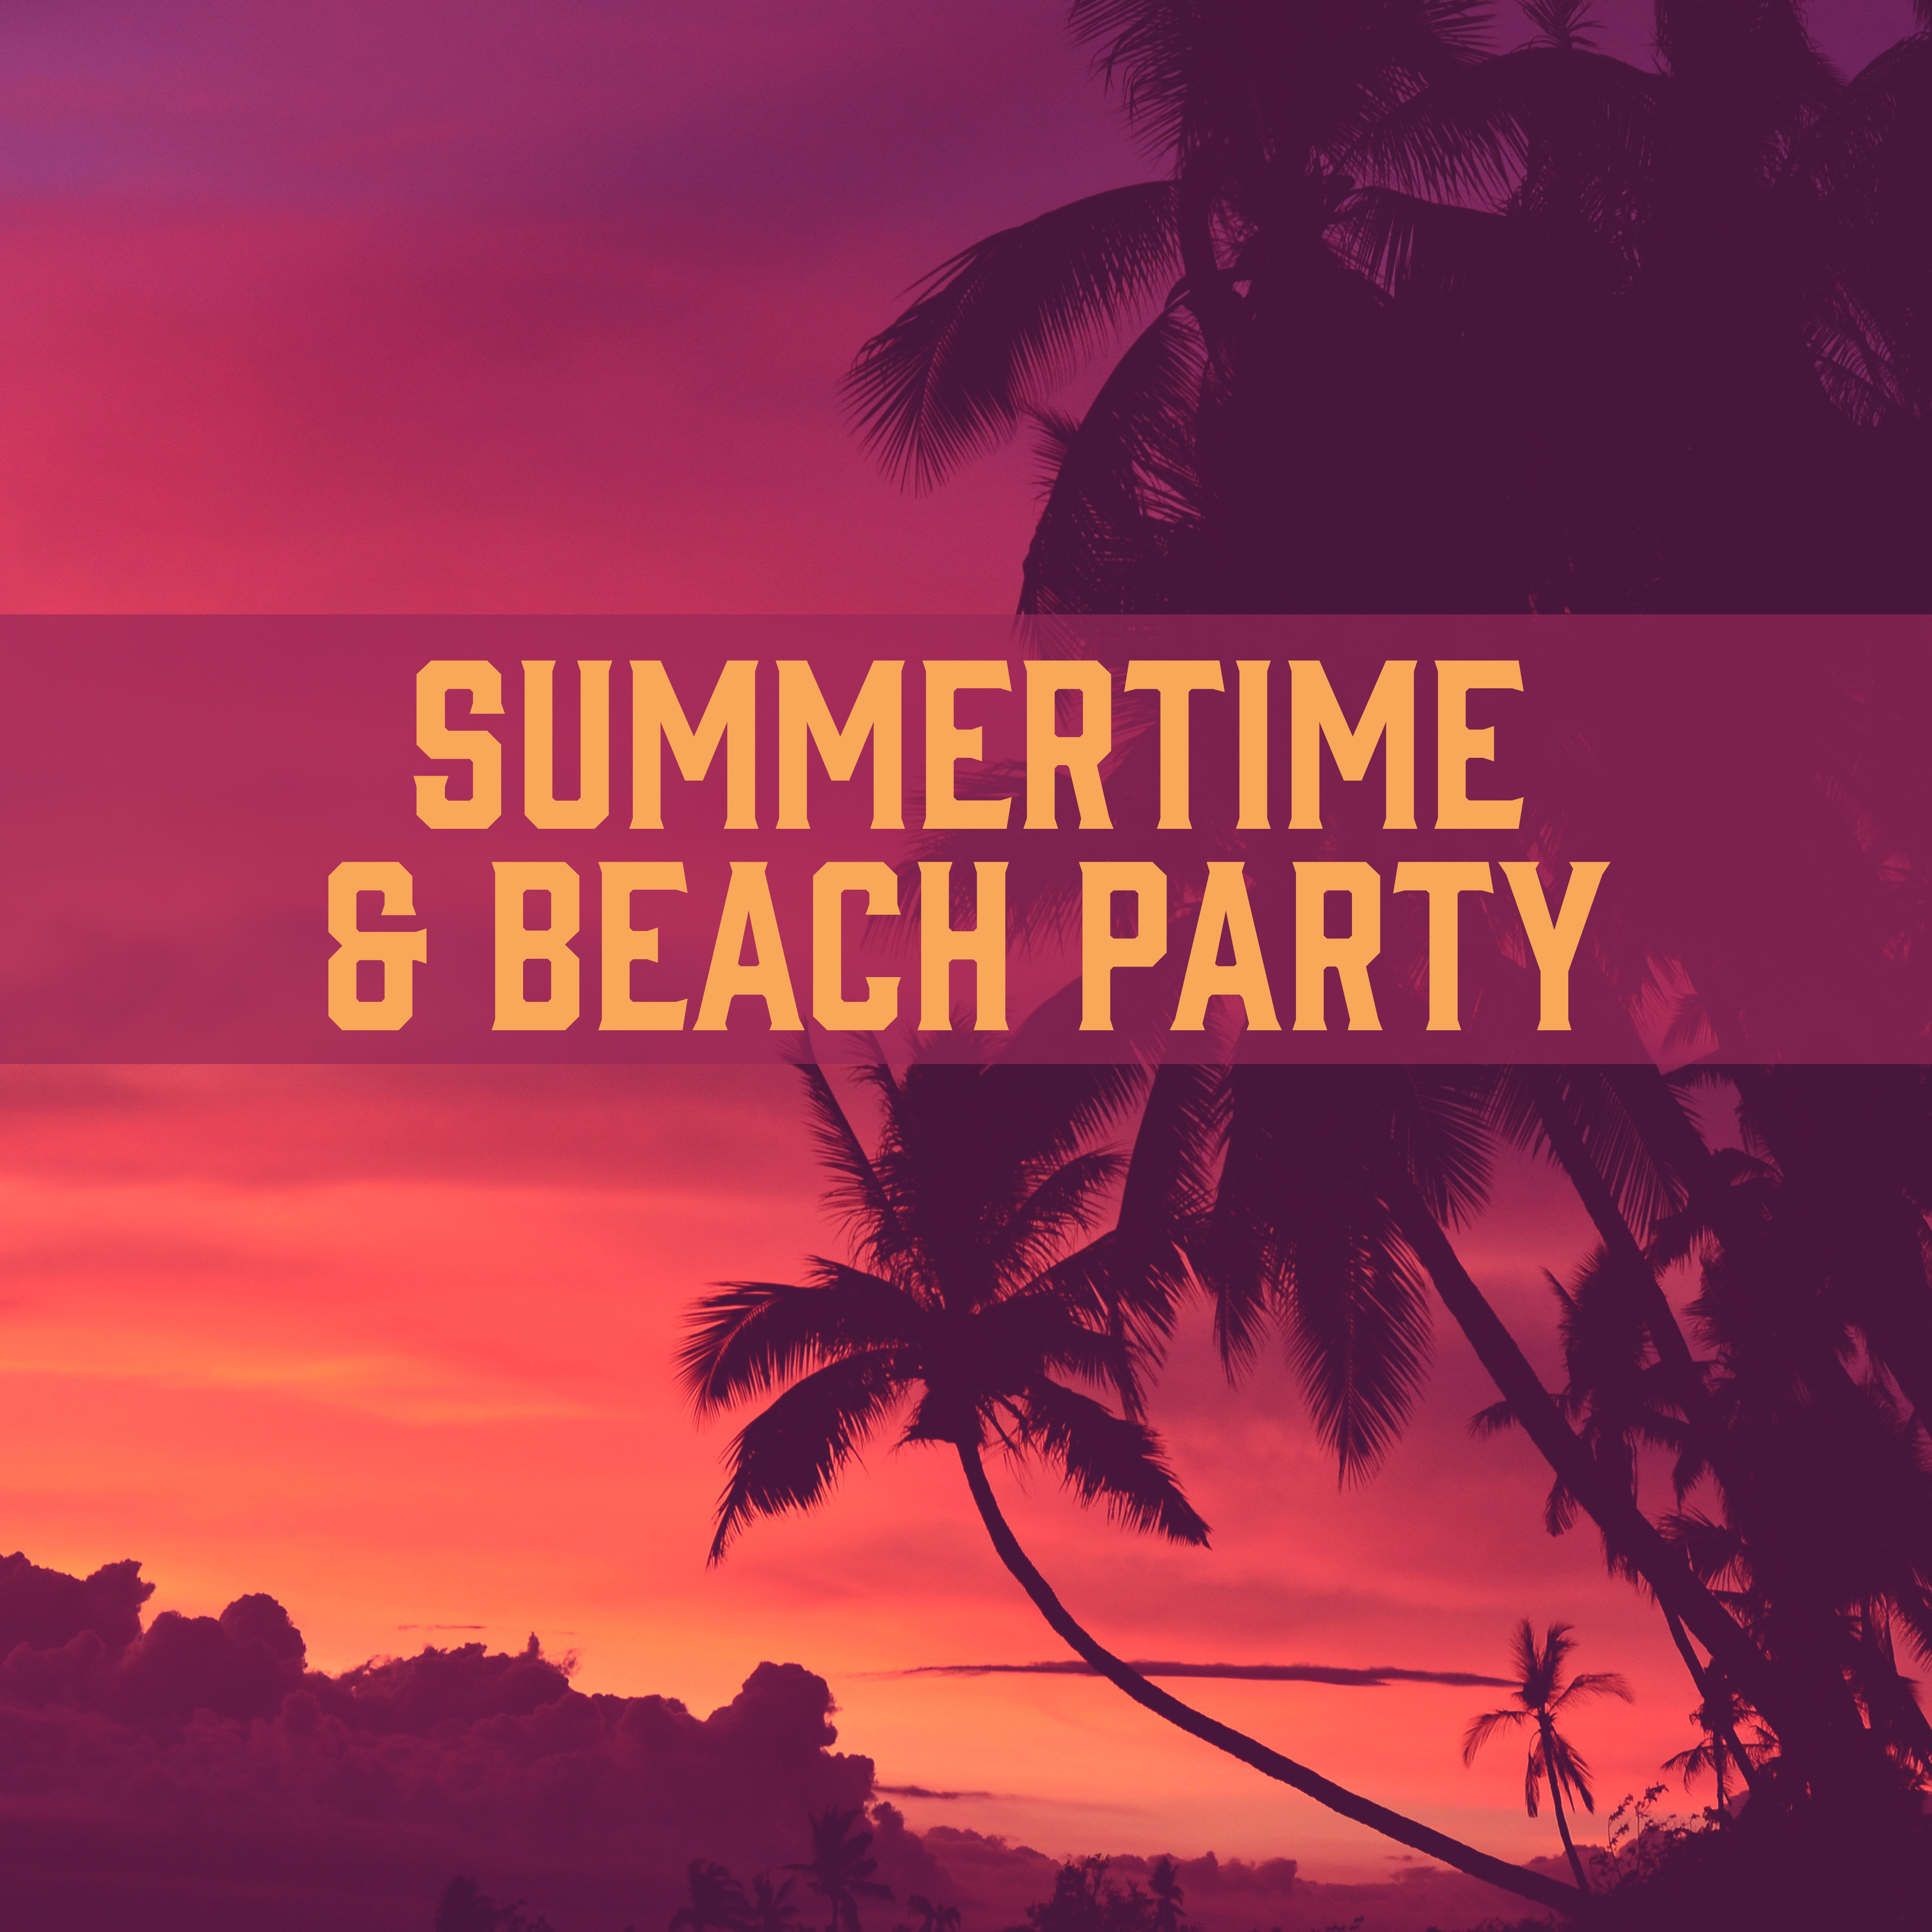 Summertime & Beach Party – Chillout Sounds, Hot Holiday, Party Night, Crazy Music, Good Energy